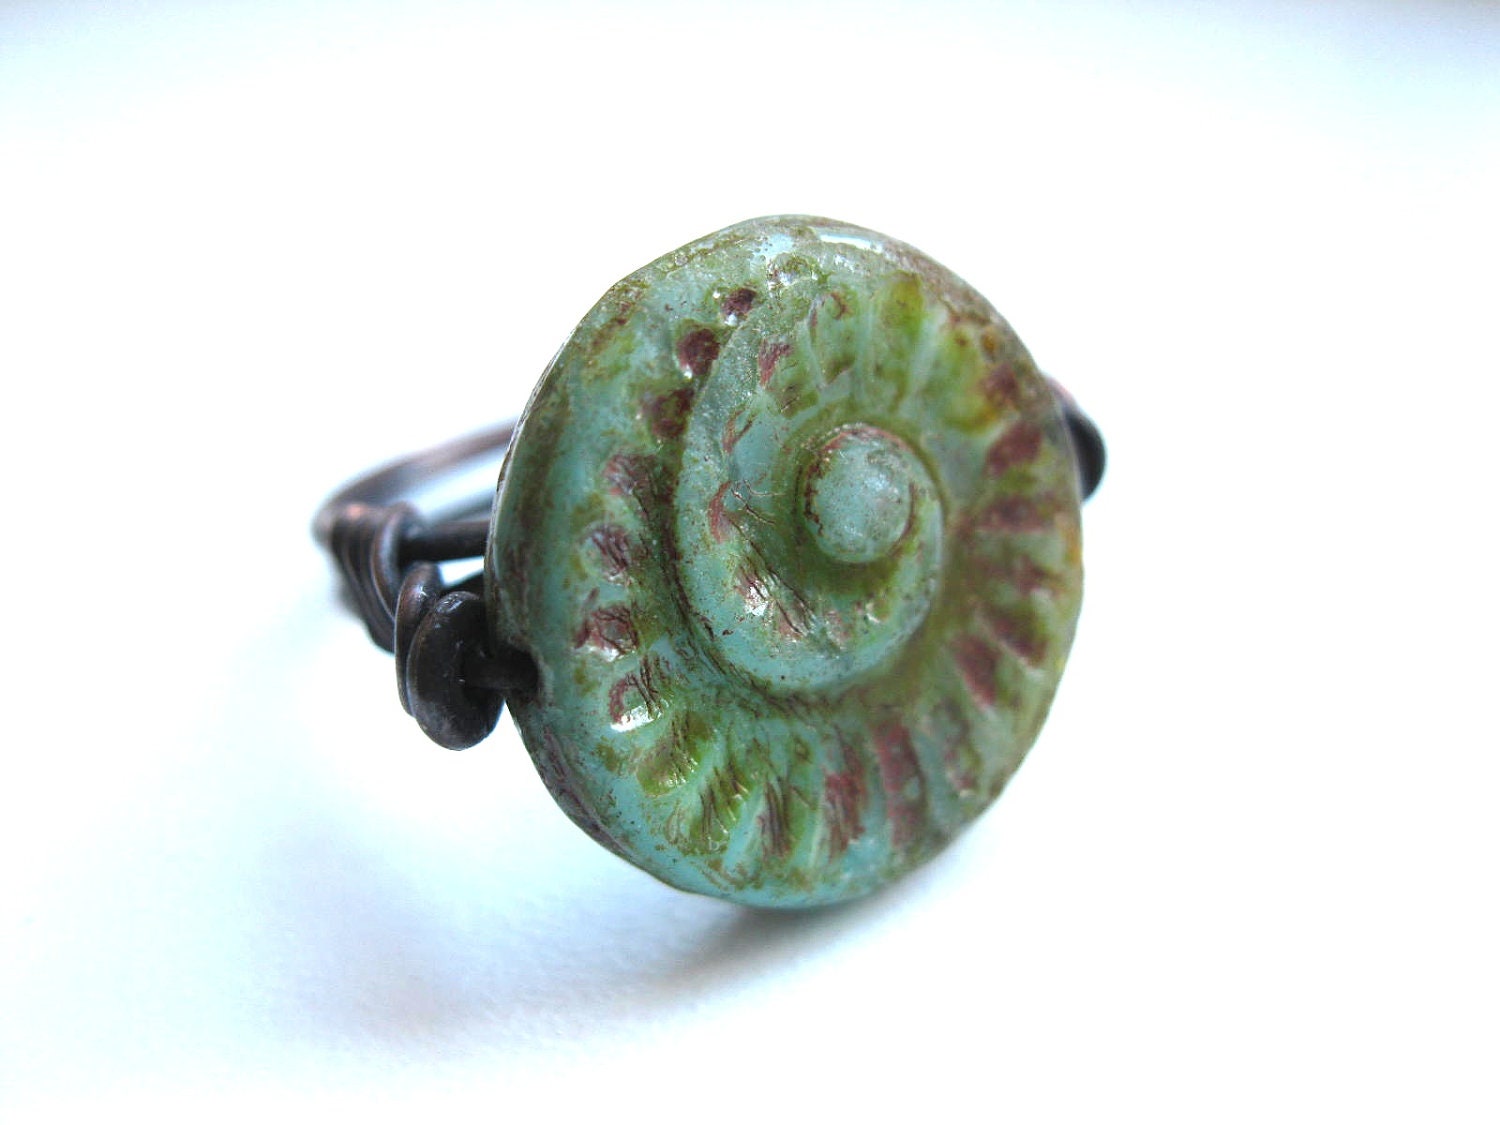 Spring Green Spiral Cocktail Ring in hand-forged copper in your size. For the Steampunk Naturalist. Made to Order. - feralstrumpet